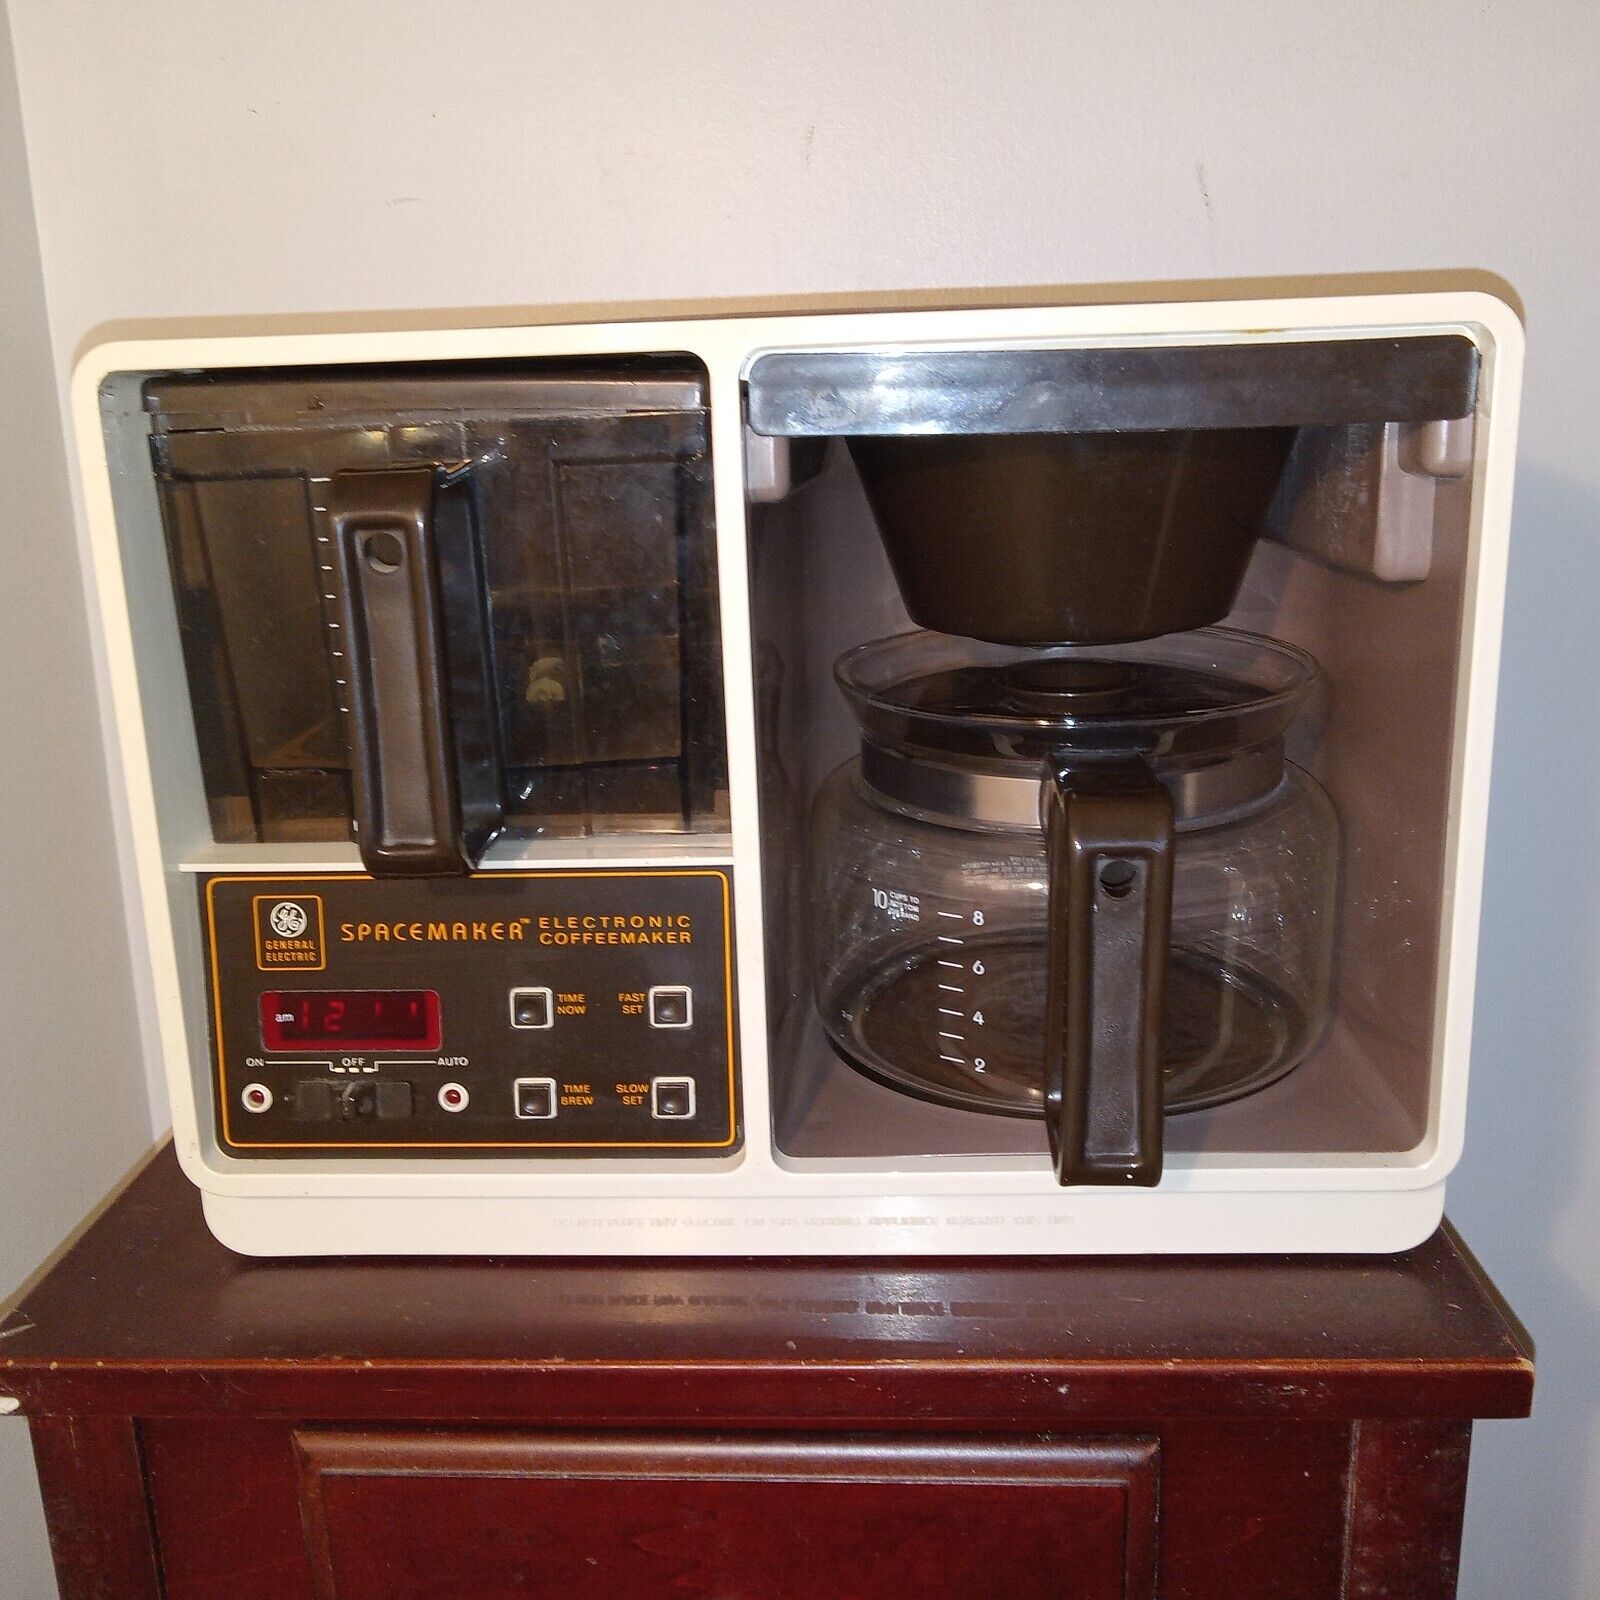 GE SPACEMAKER ELECTRONIC COFFEEMAKER Vintage GENERAL ELECTRIC